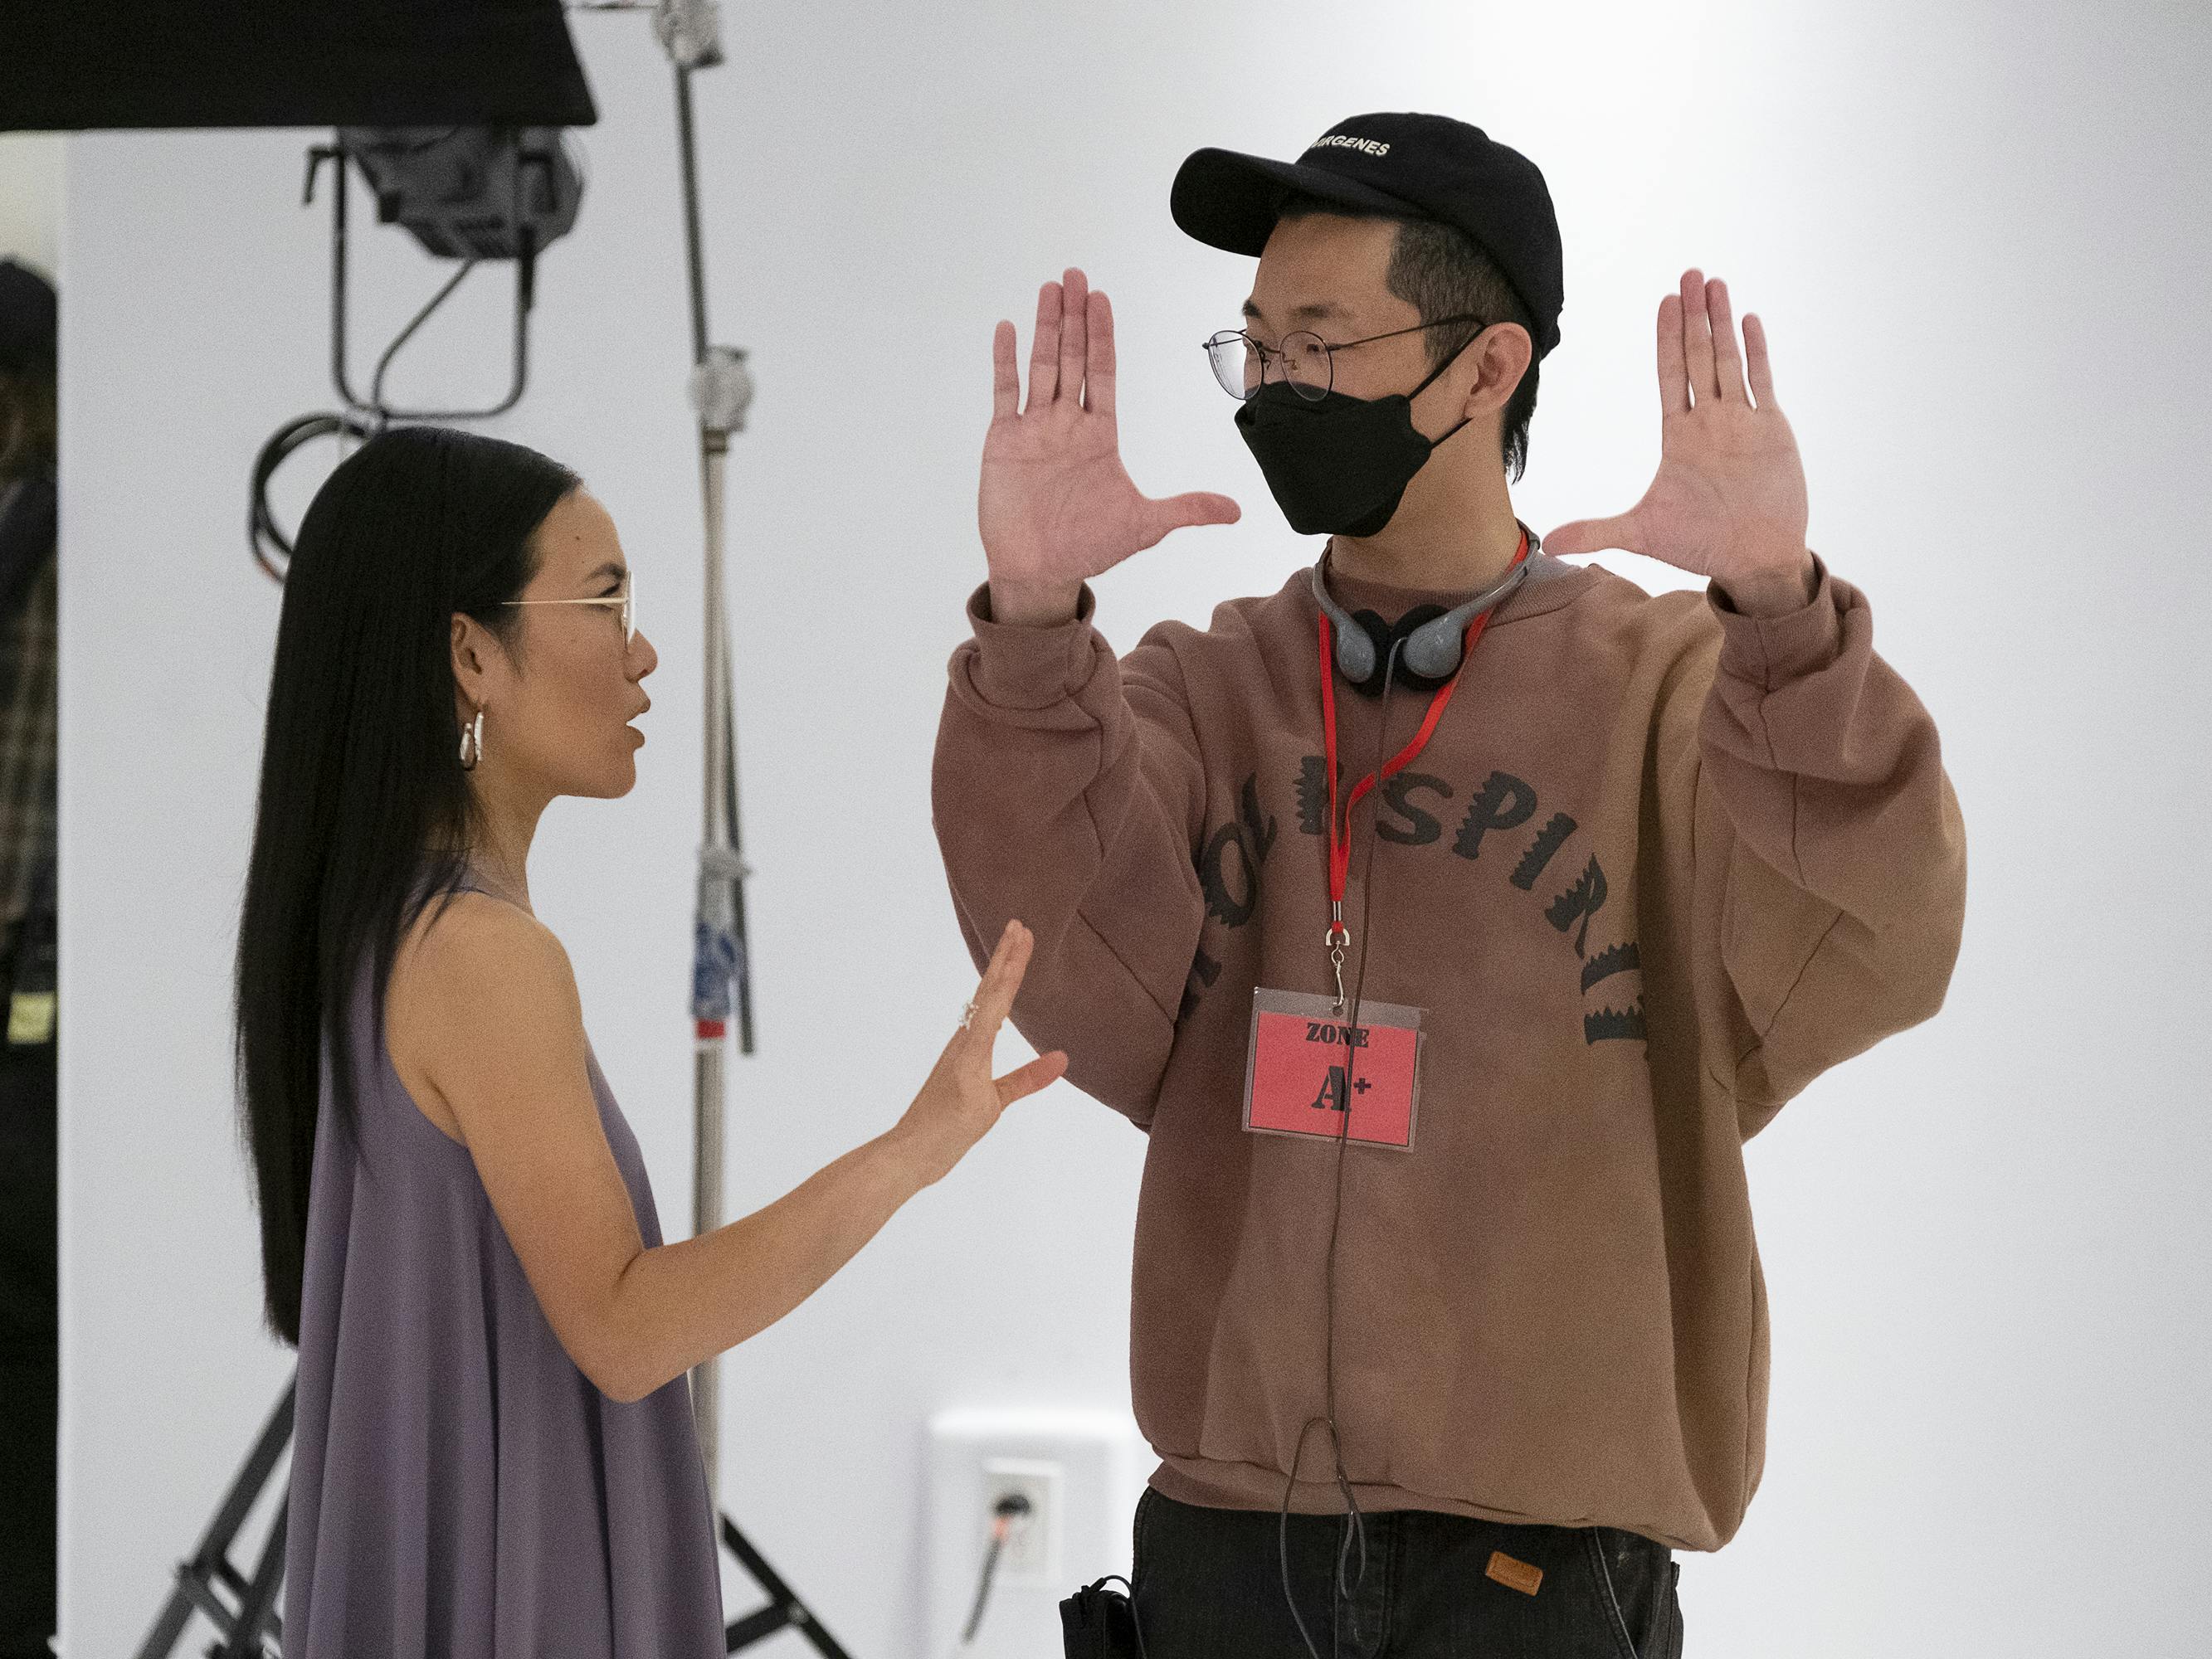 Ali Wong talks to Lee Sung Jin in a white-walled space. Wong wears a purple top and Lee wears a brown sweatshirt.